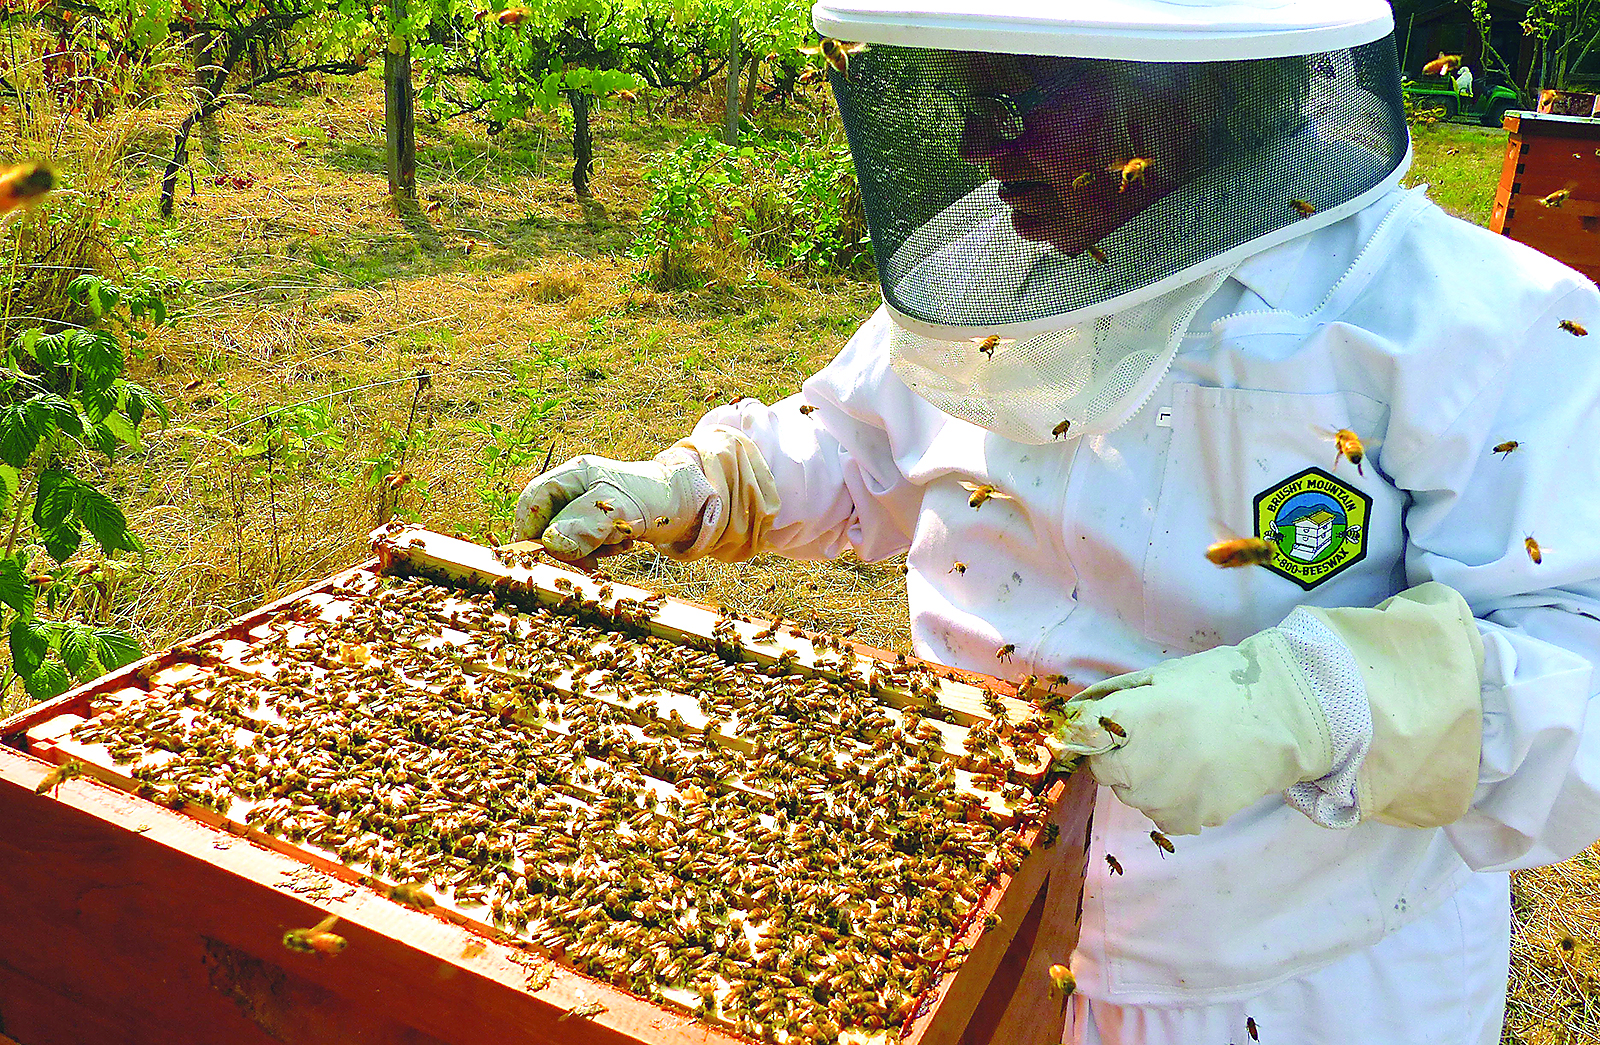 Beekeepers, growers get stung by hive thefts - The Blade